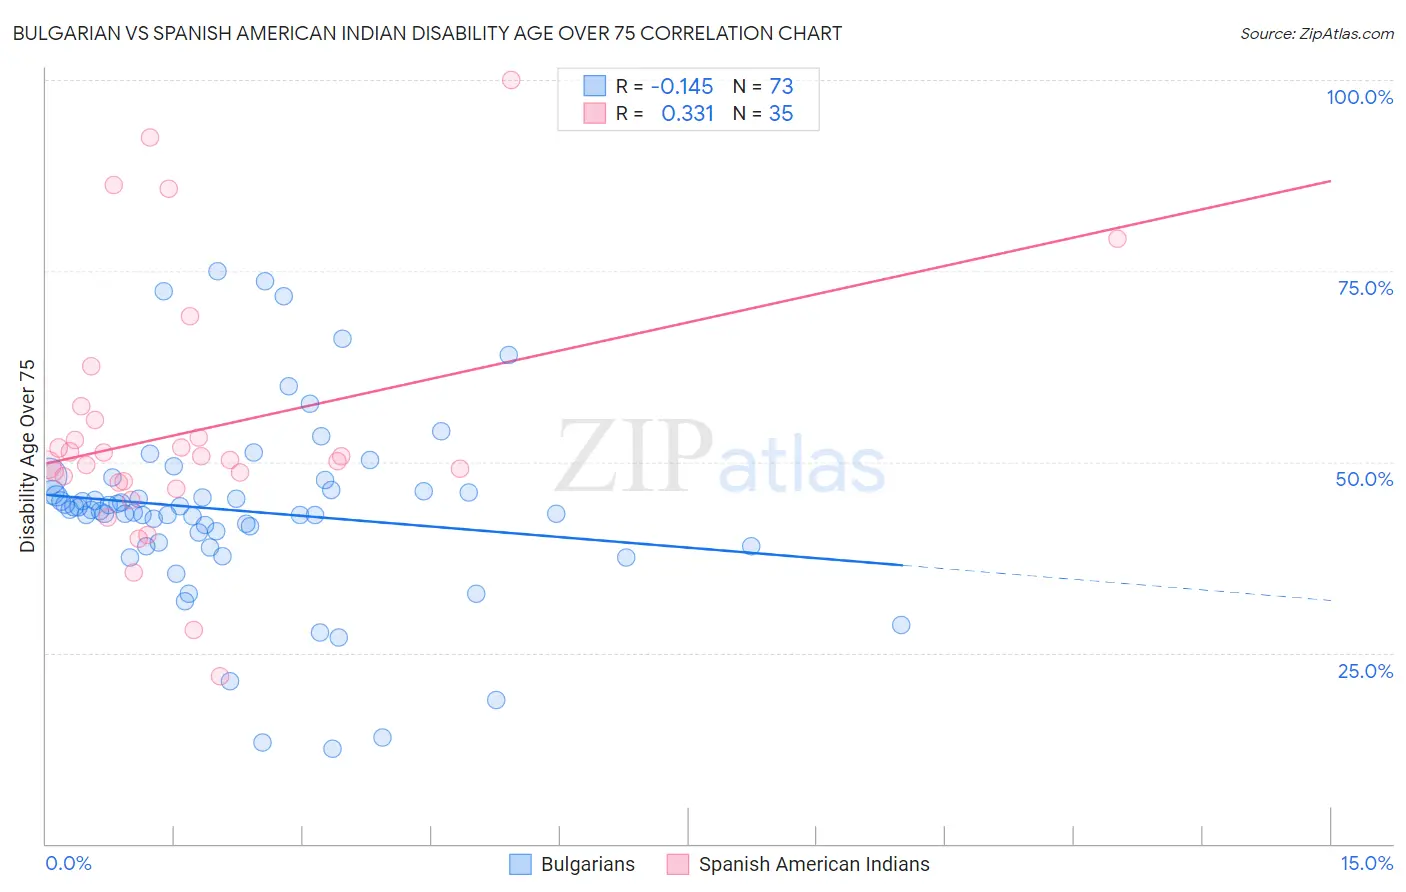 Bulgarian vs Spanish American Indian Disability Age Over 75